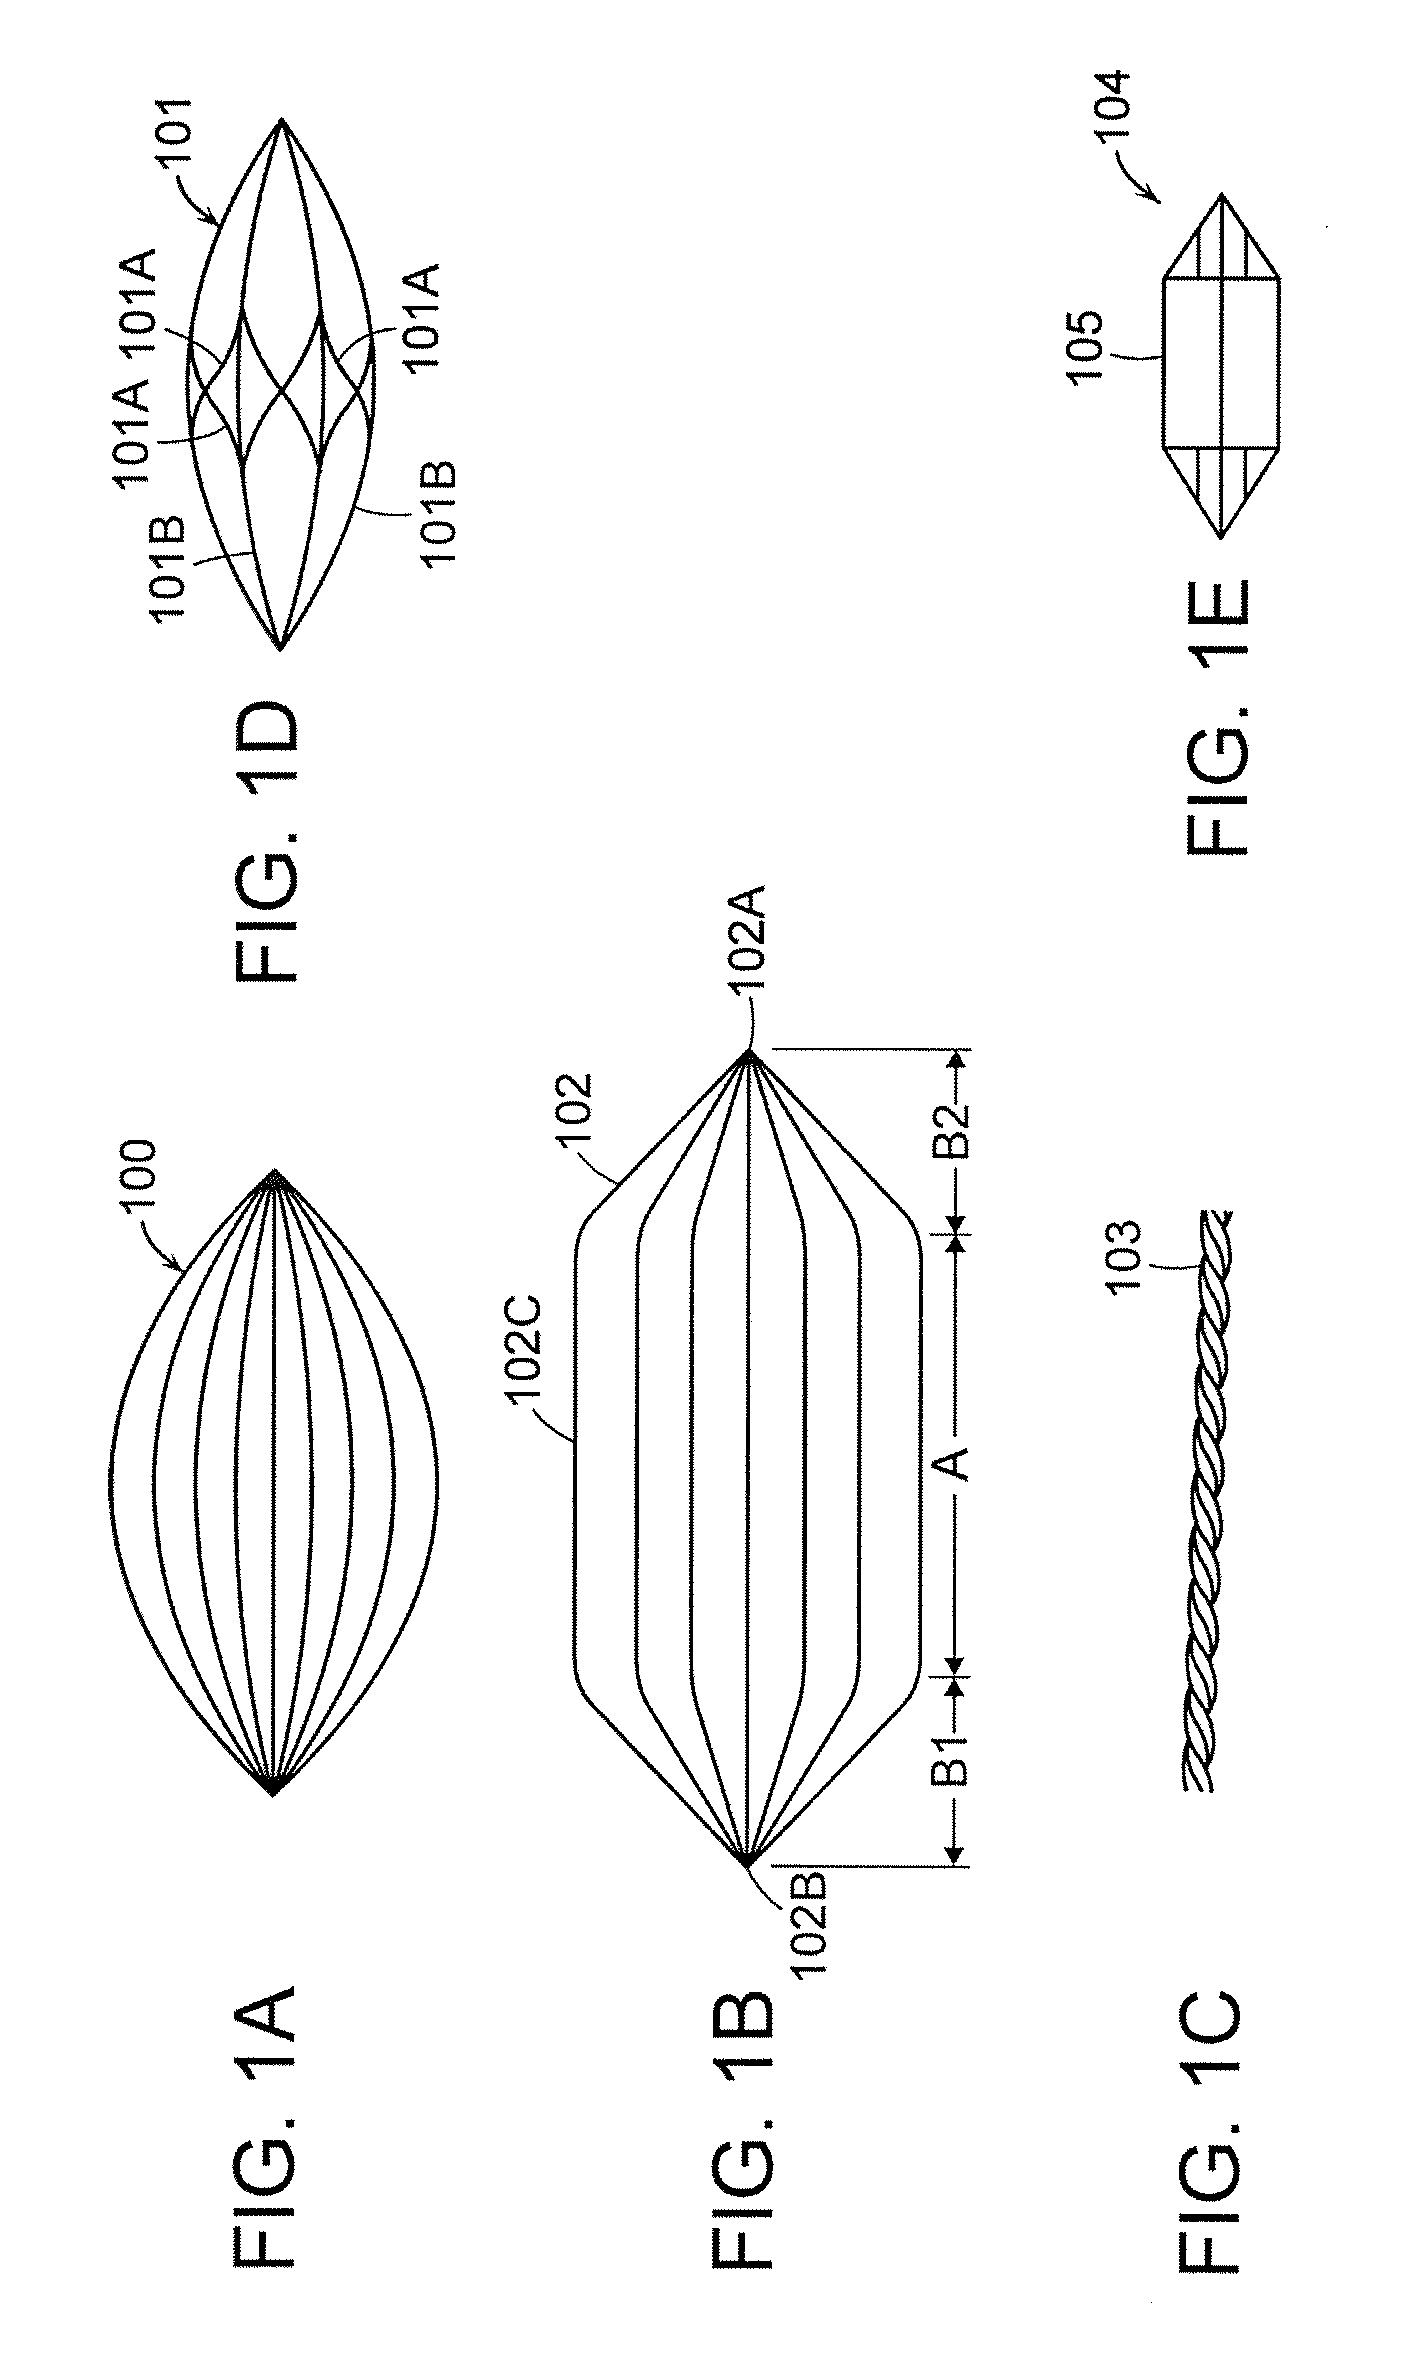 Non-occluding dilation device